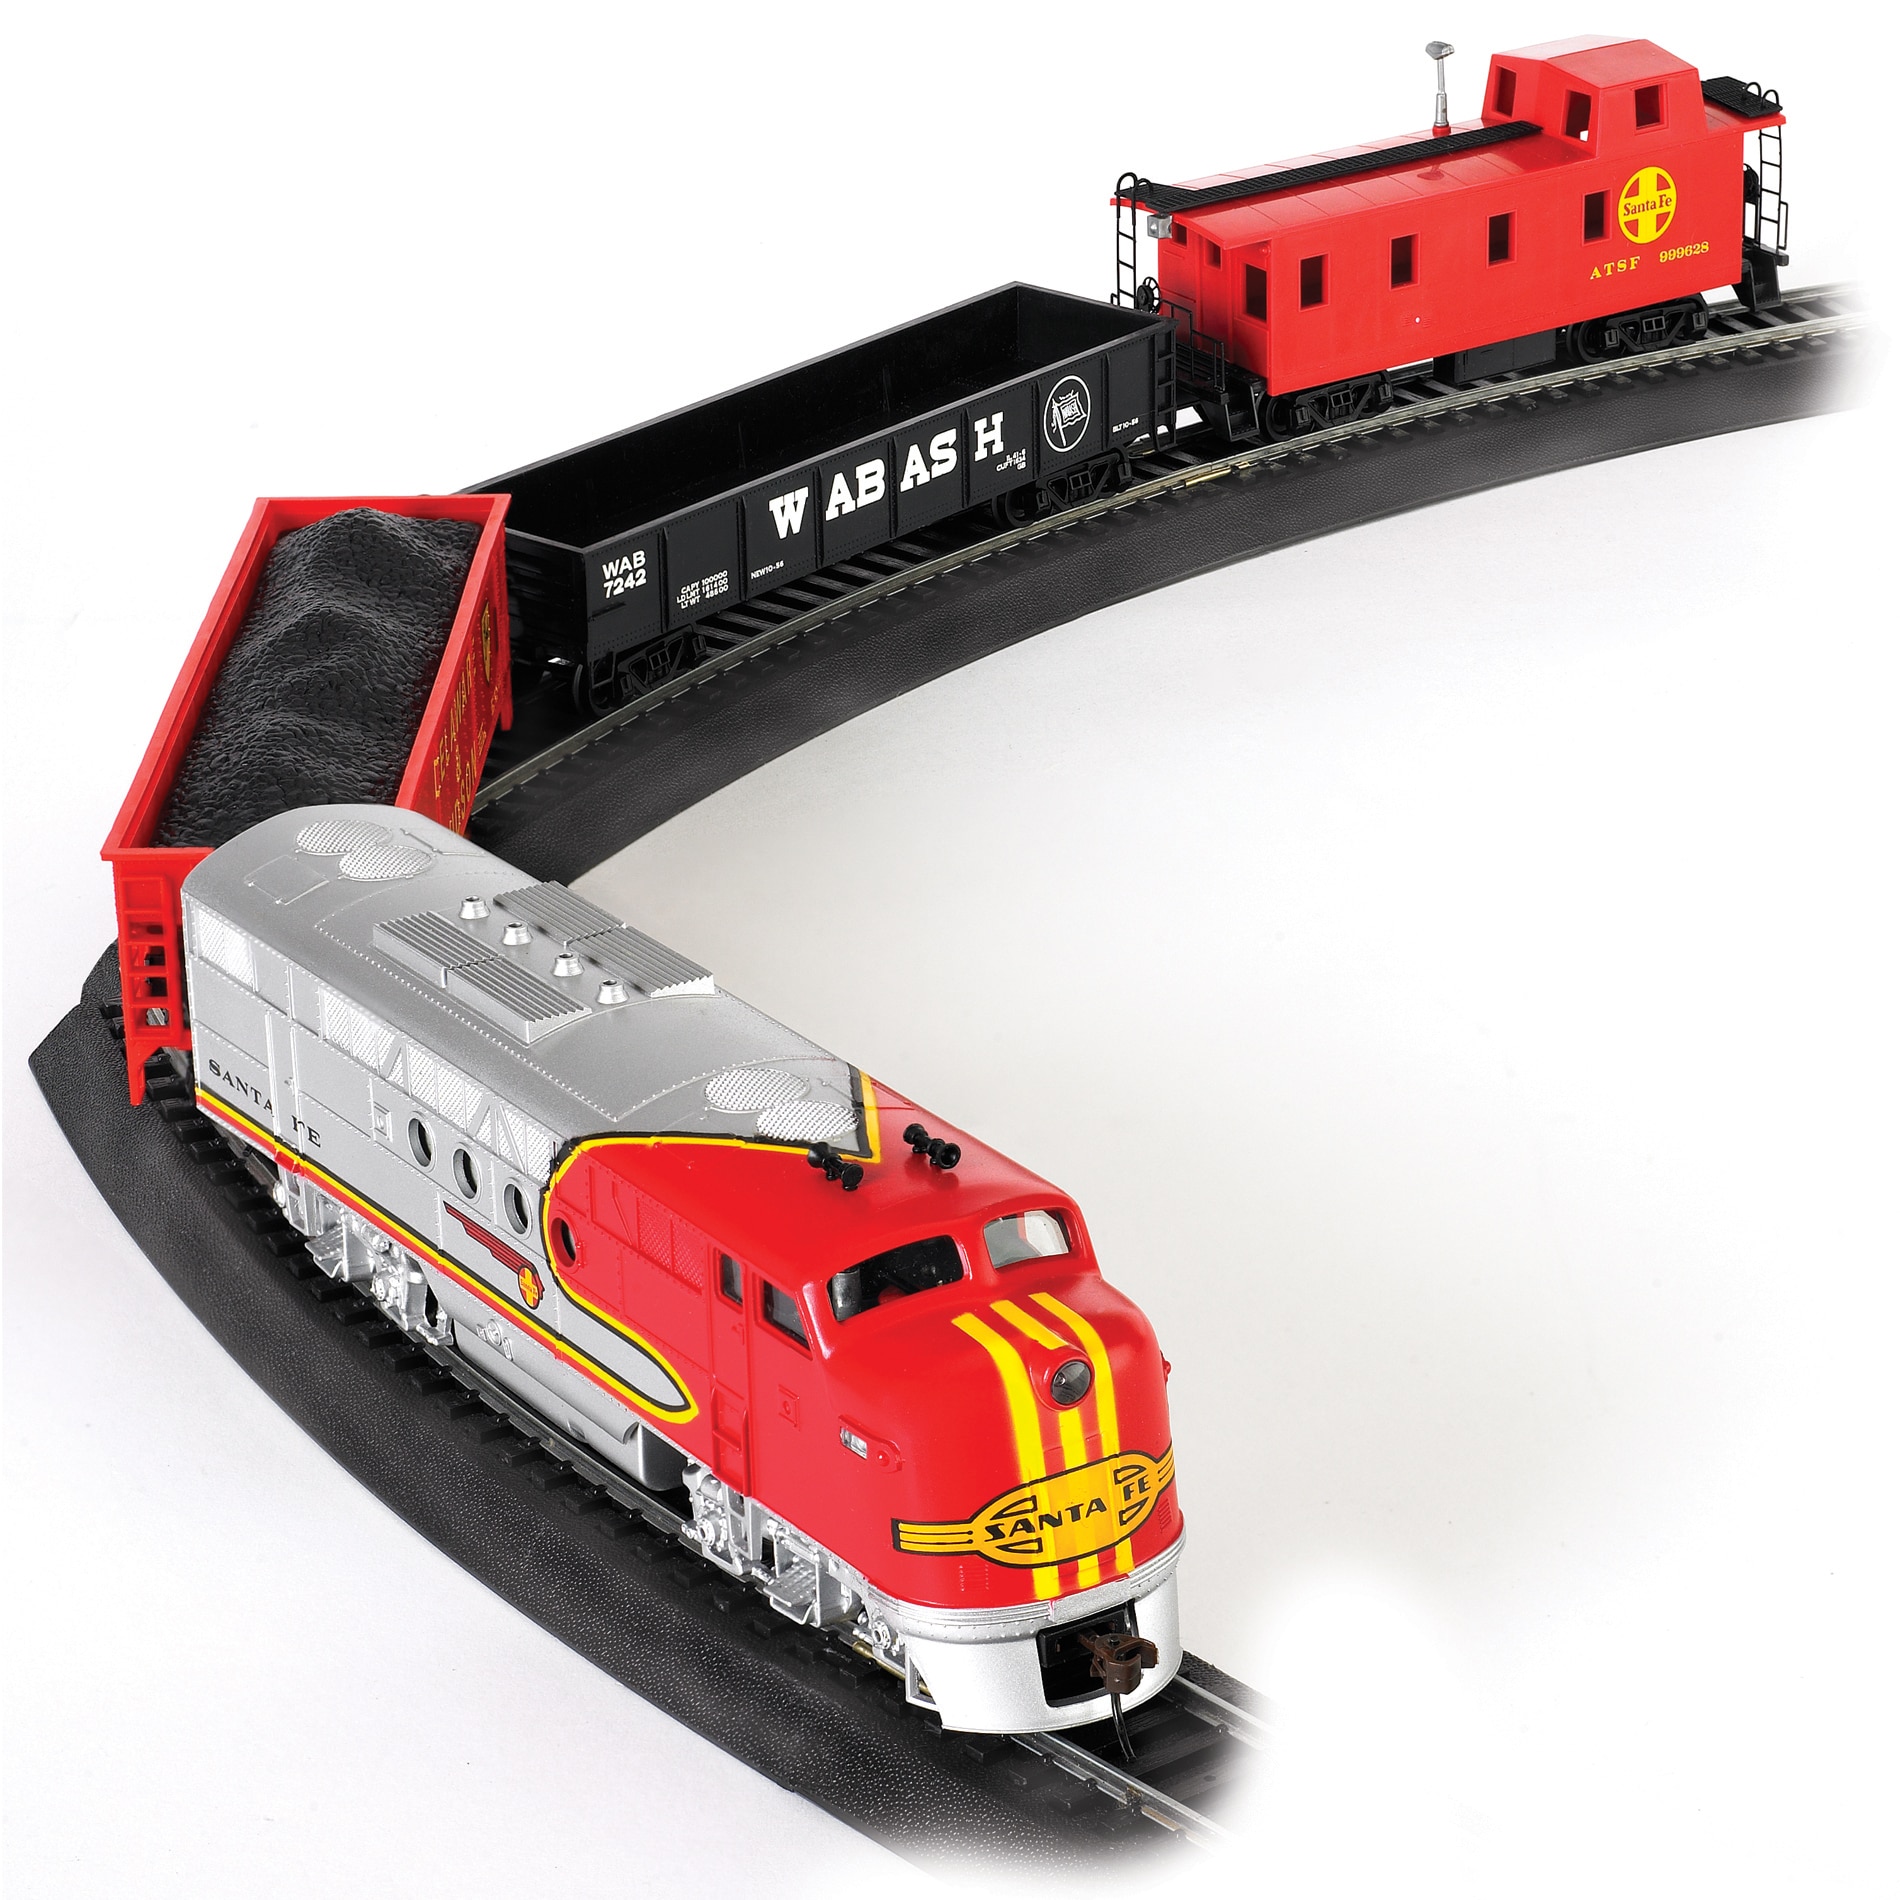  13922743 - Overstock.com Shopping - Big Discounts on Bachmann Trains